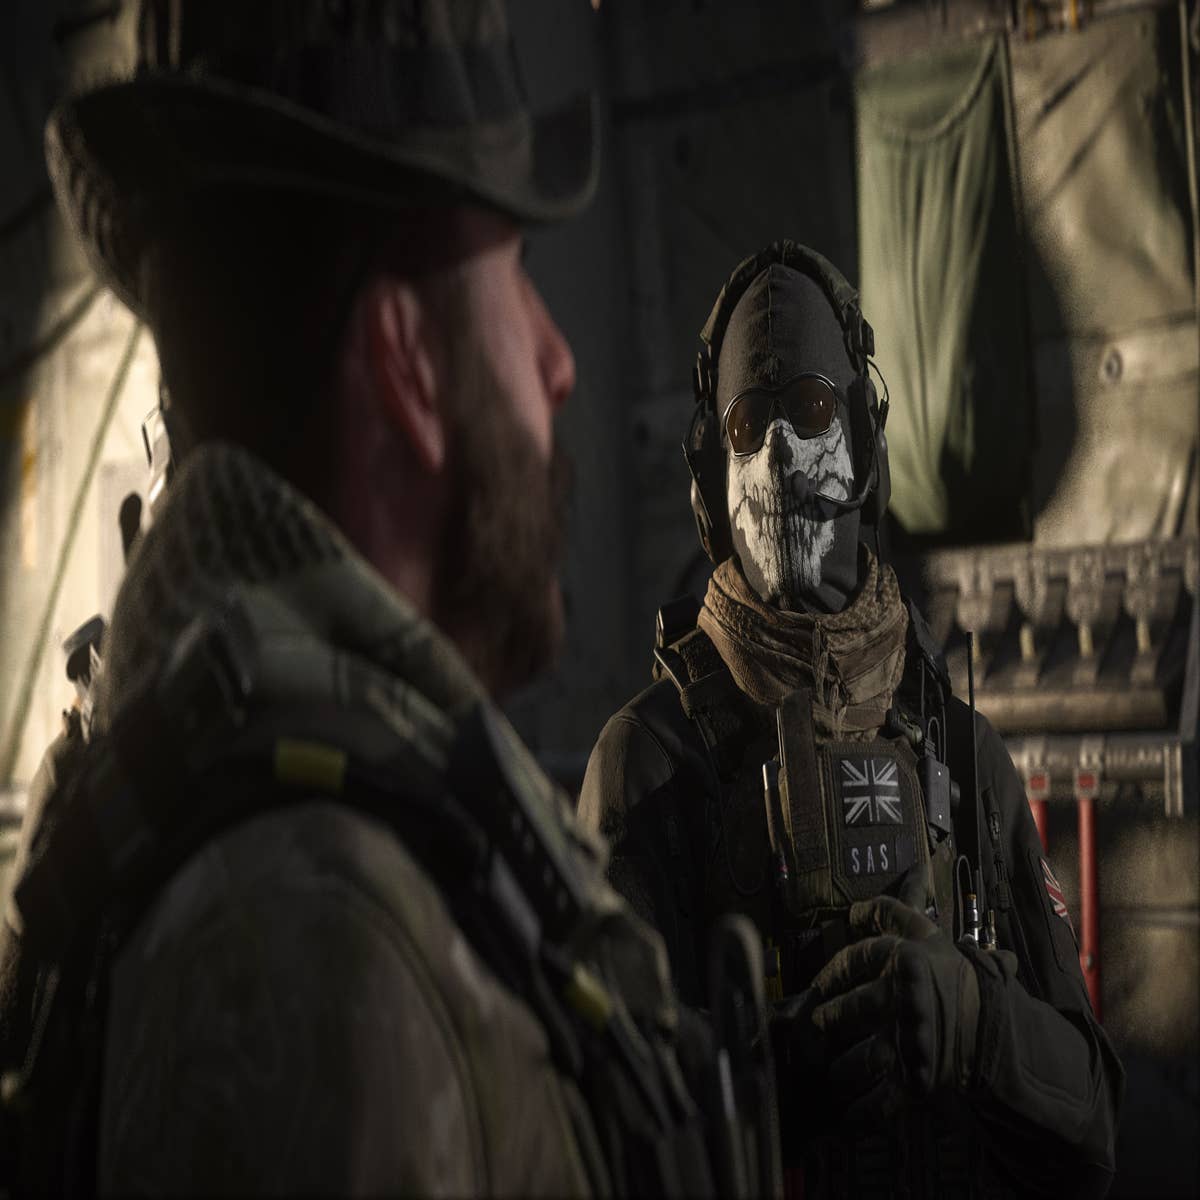 Even by Call of Duty standards, Modern Warfare 3's campaign is